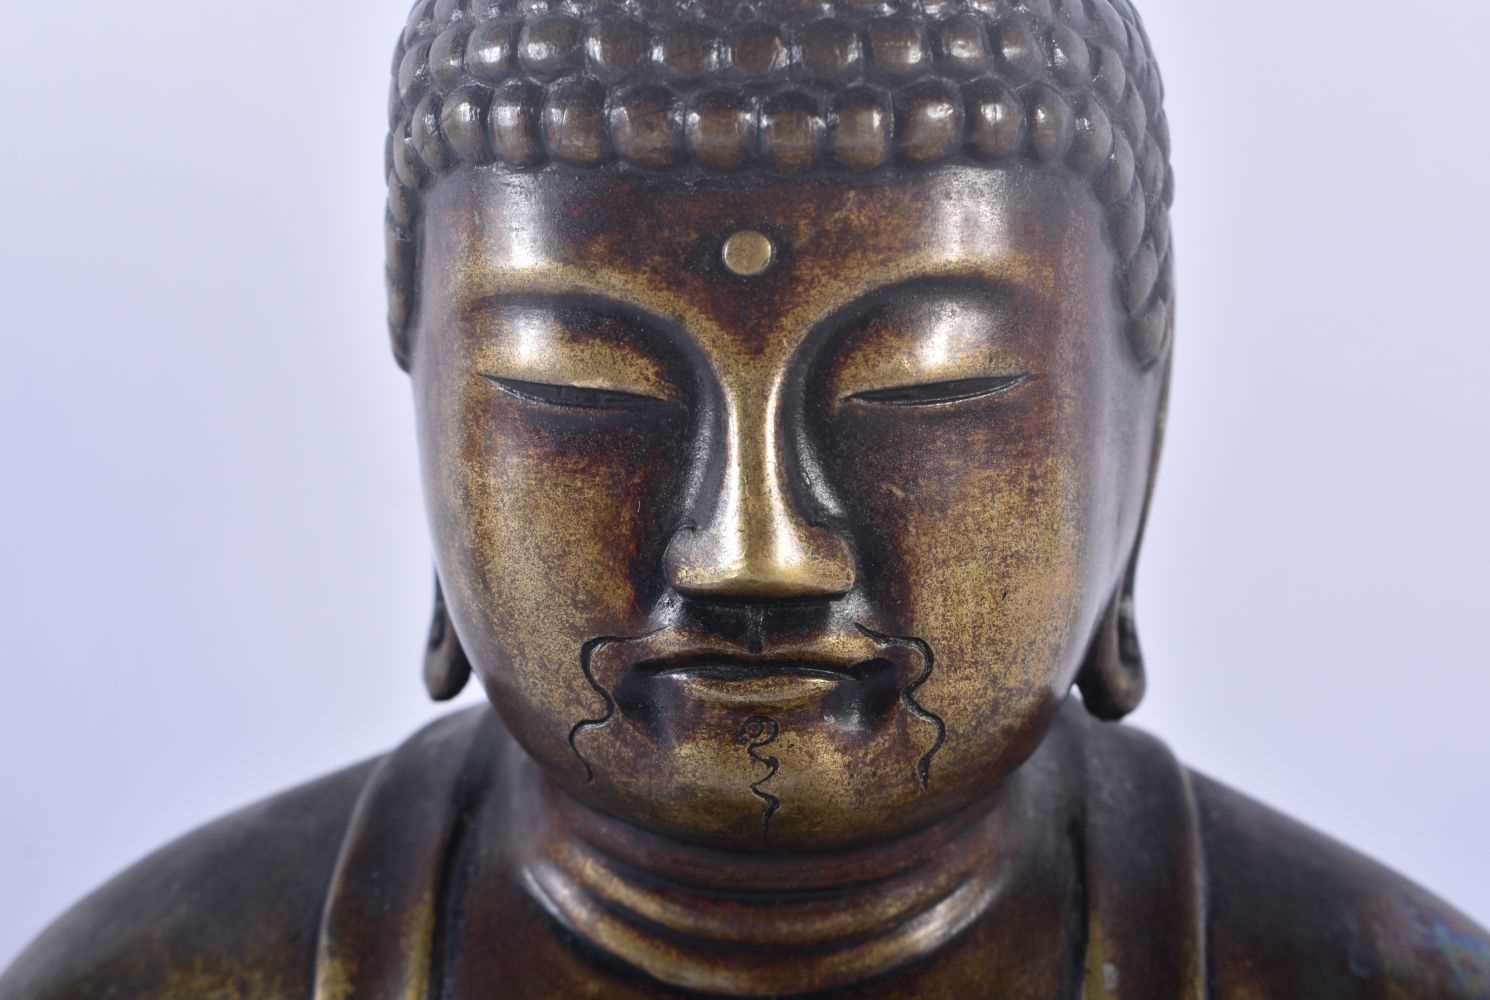 A 19TH CENTURY JAPANESE MEIJI PERIOD BRONZE FIGURE OF A BUDDHA modelled in robes. 24 cm x 16 cm. - Image 2 of 6